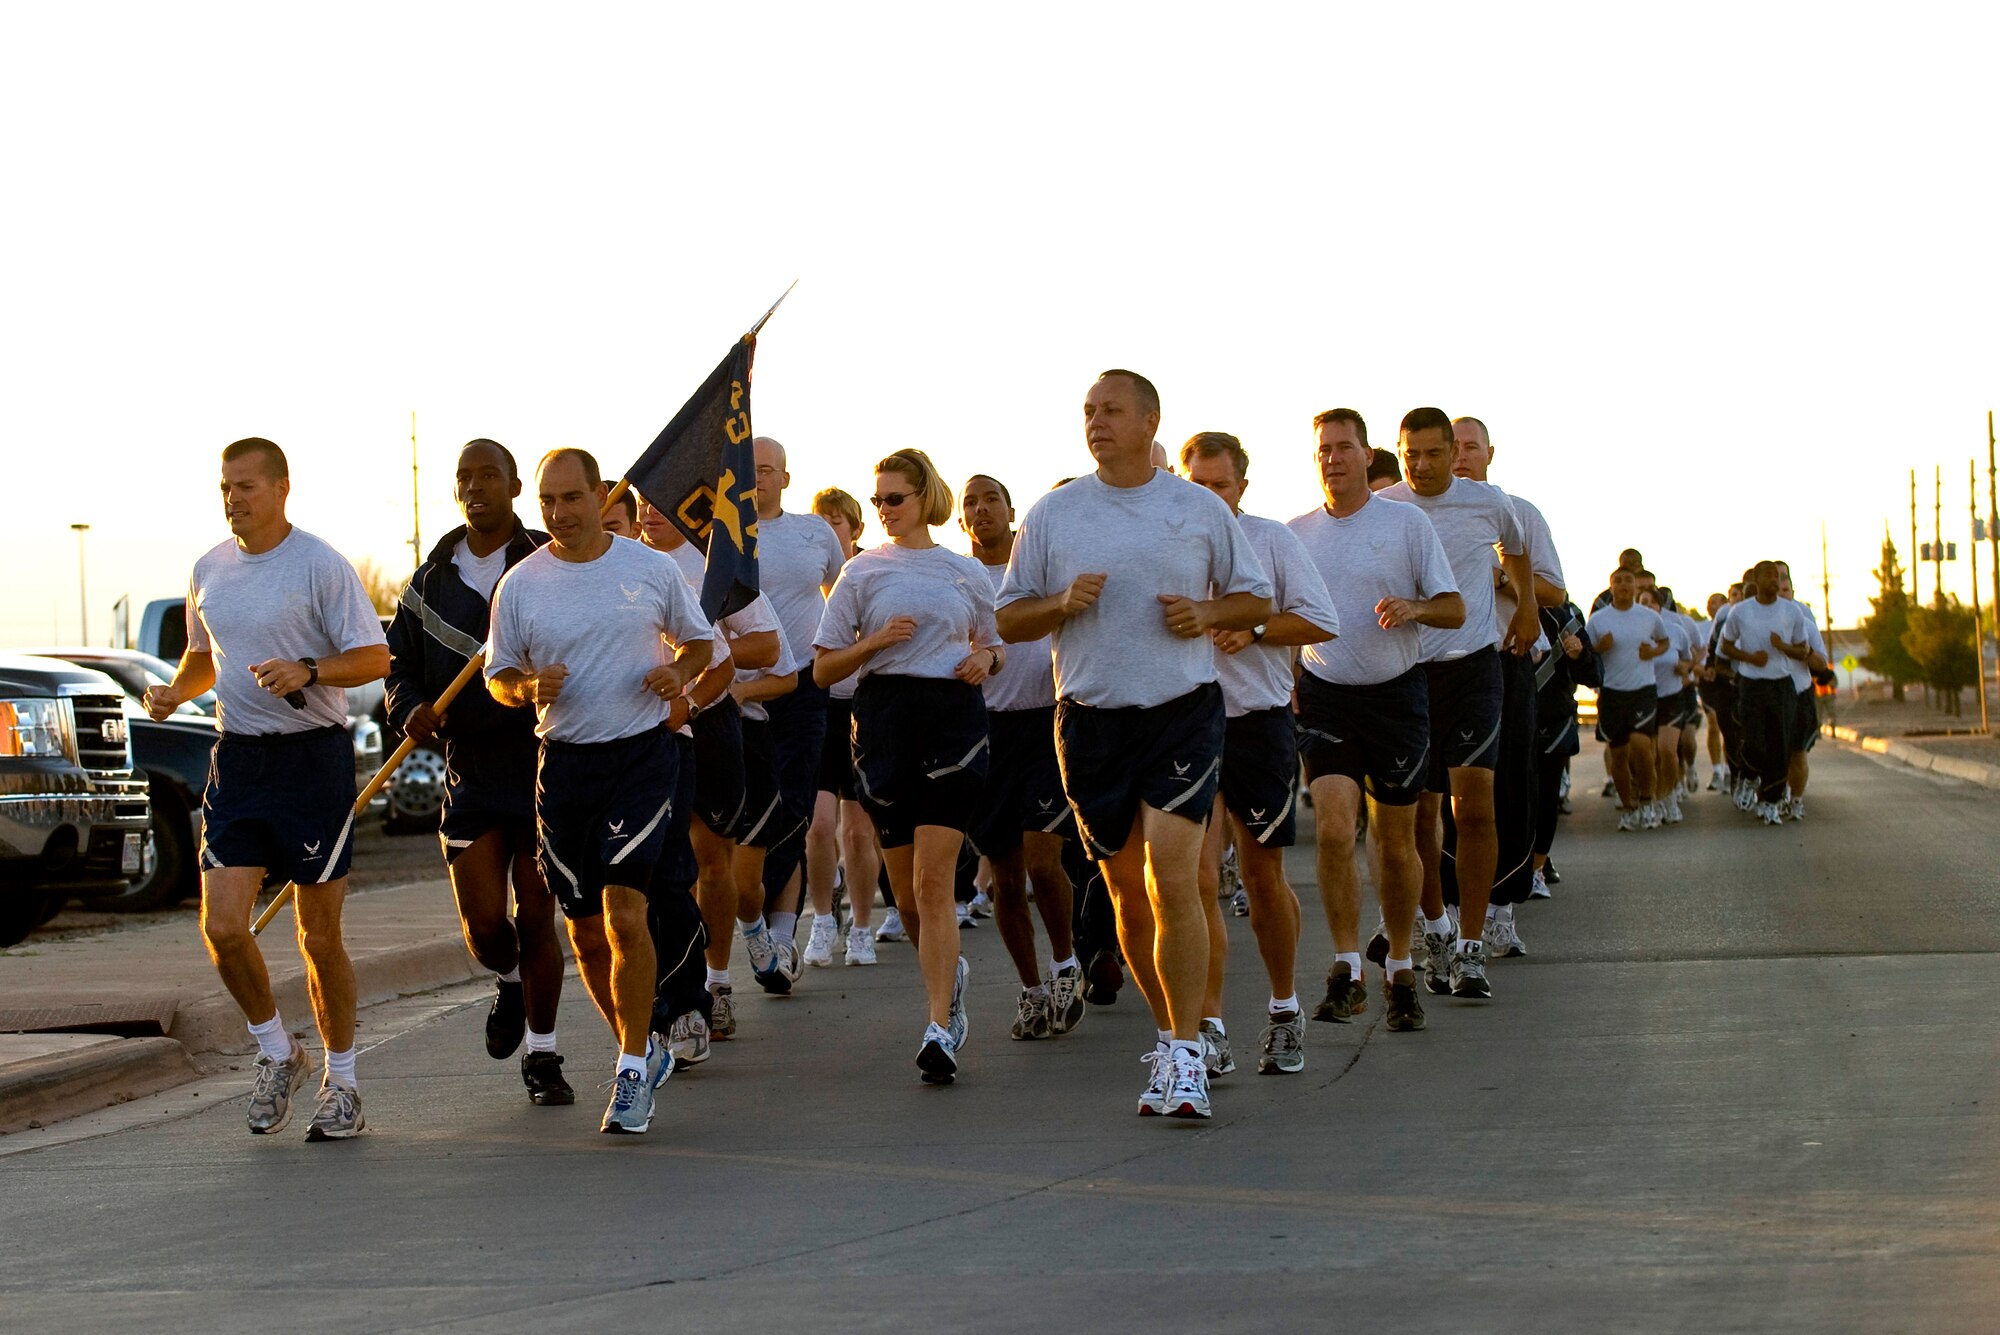 HOLLOMAN AIR FORCE BASE NEW MEXICO -Colonel Jeffrey Harrigian 49th Fighter Wing Commander leads the way, by leading members of the 49th Fighter Wing in a Wing run to kick off the annual Holloman AFB Sports day on 10 Oct 2008.
(U.S Air Force photo by:Tech Sgt. Alan Port) released